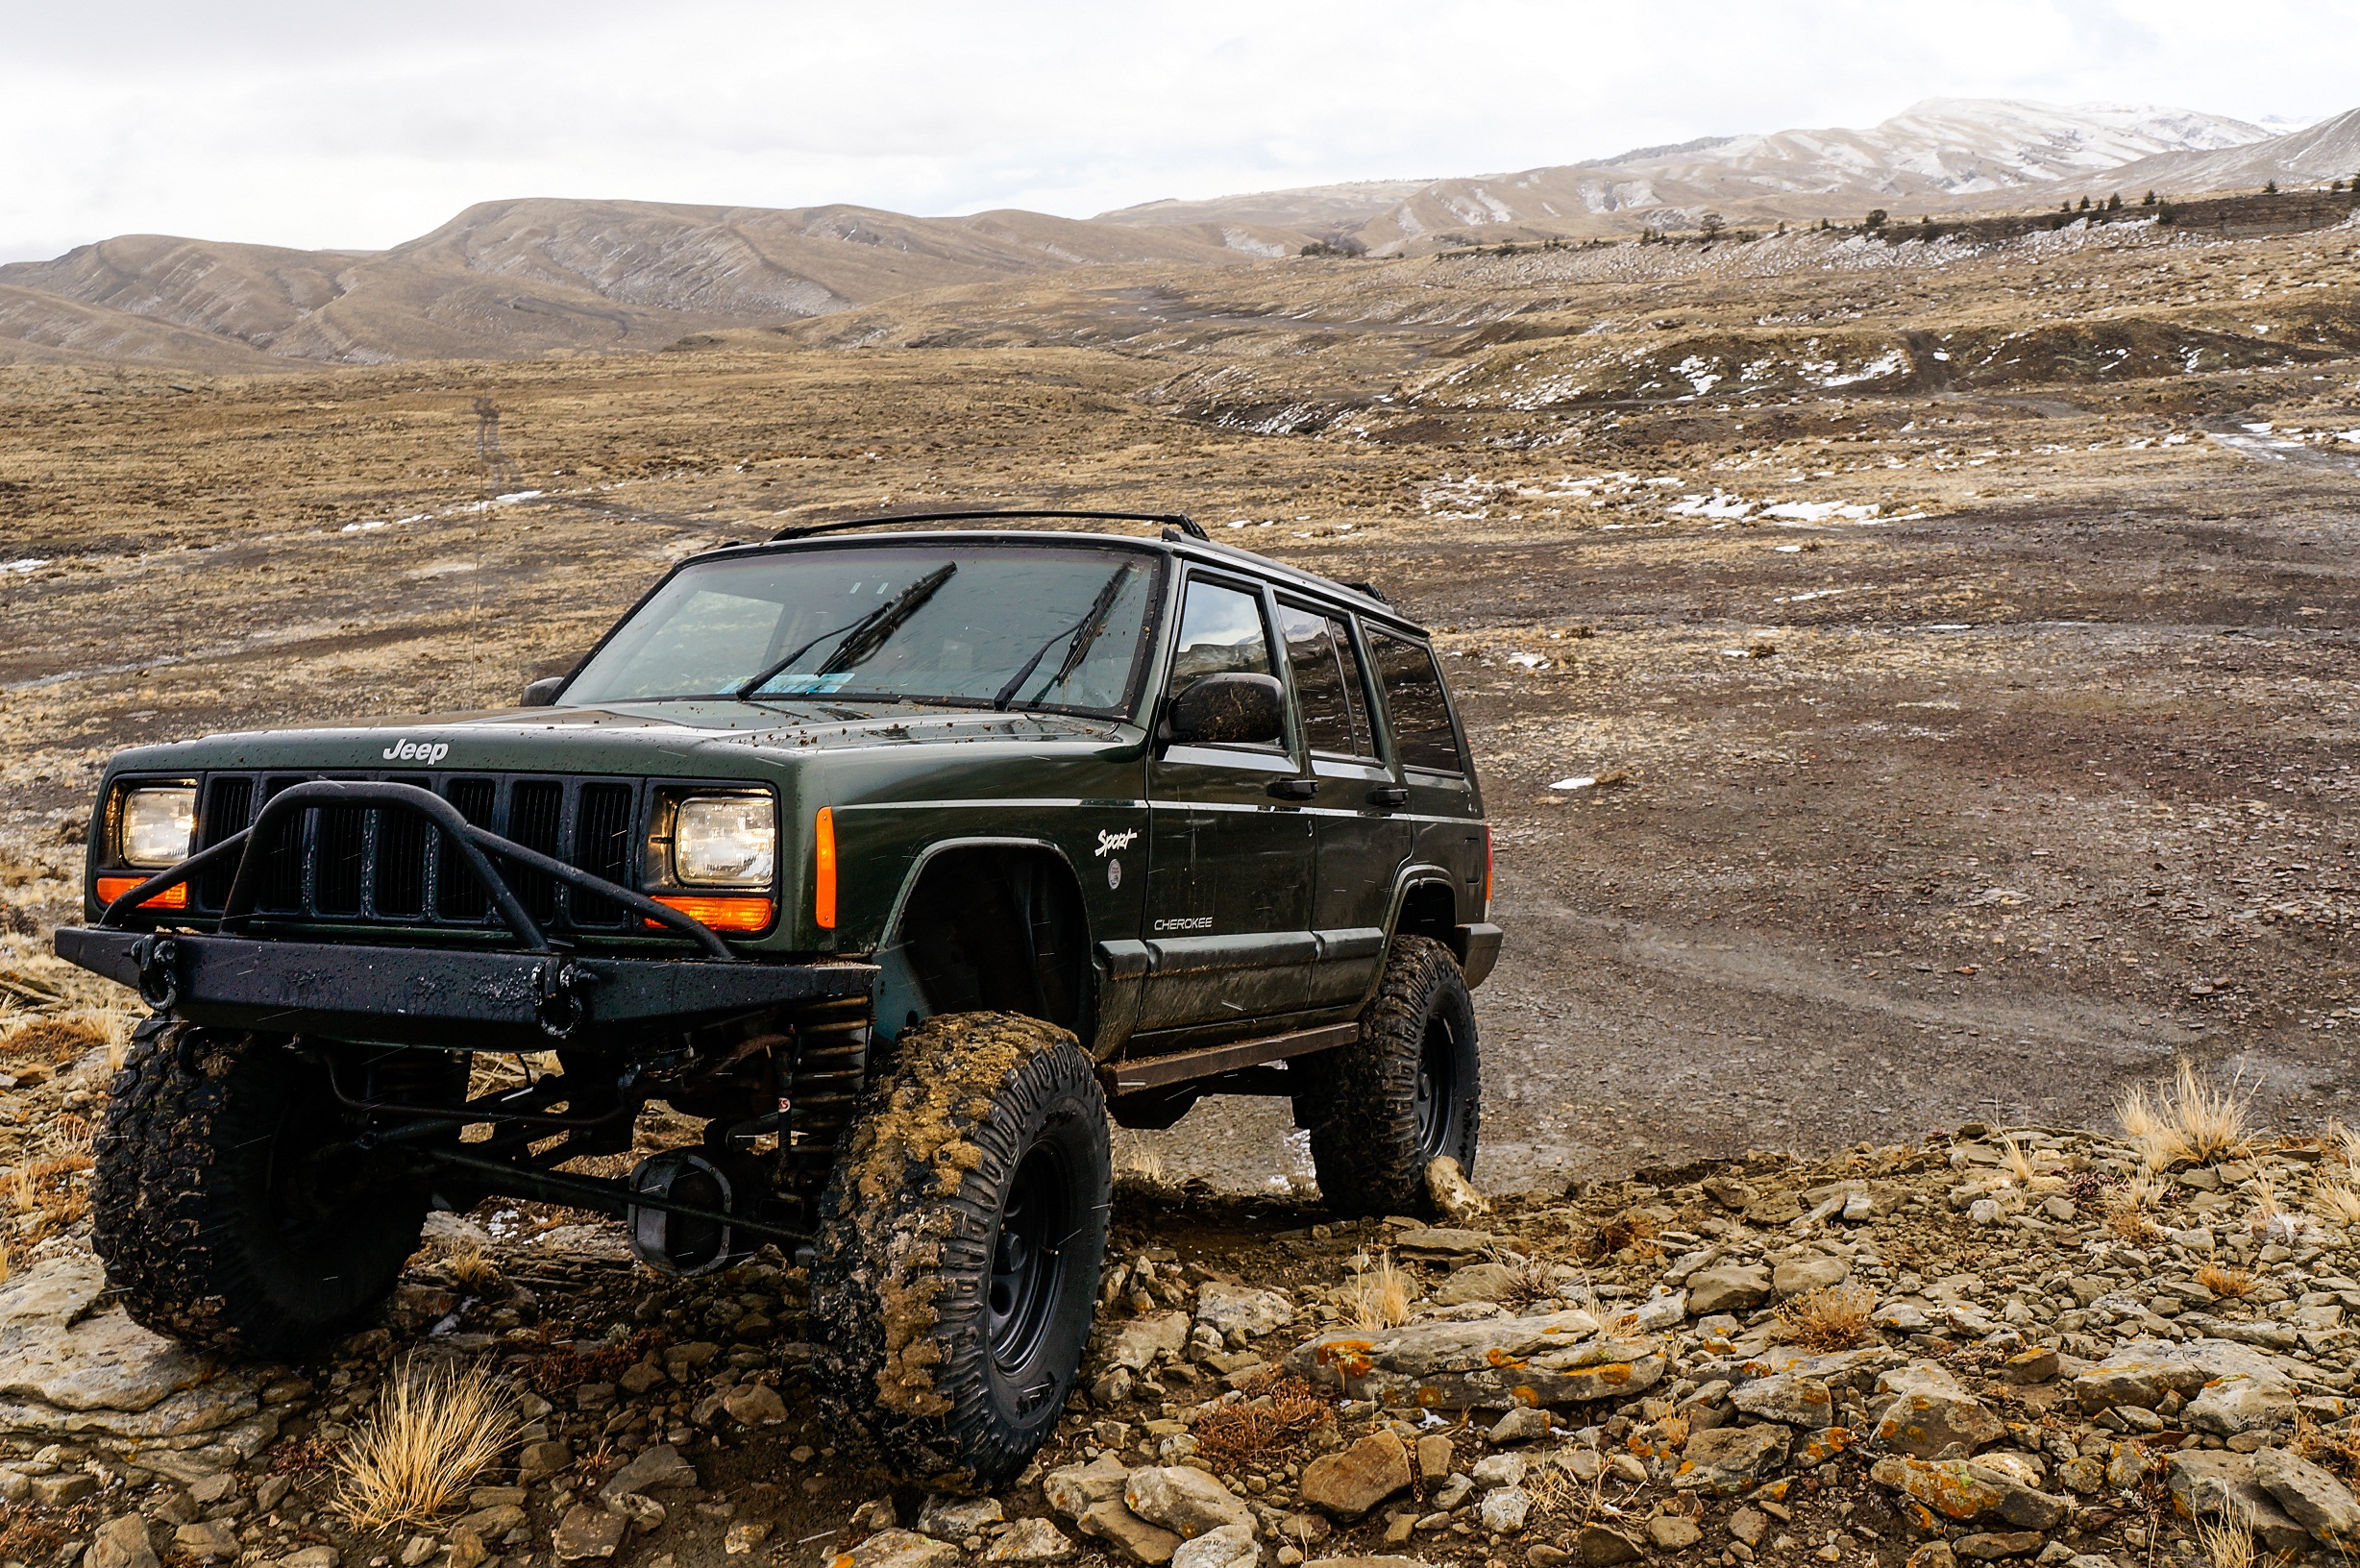 Free Download Jeep Cherokee Hd Wallpapers Backgrounds 2456x1632 For Your Desktop Mobile Tablet Explore 48 Jeep Xj Wallpaper Jeep Images Wallpaper Lifted Jeep Wallpapers